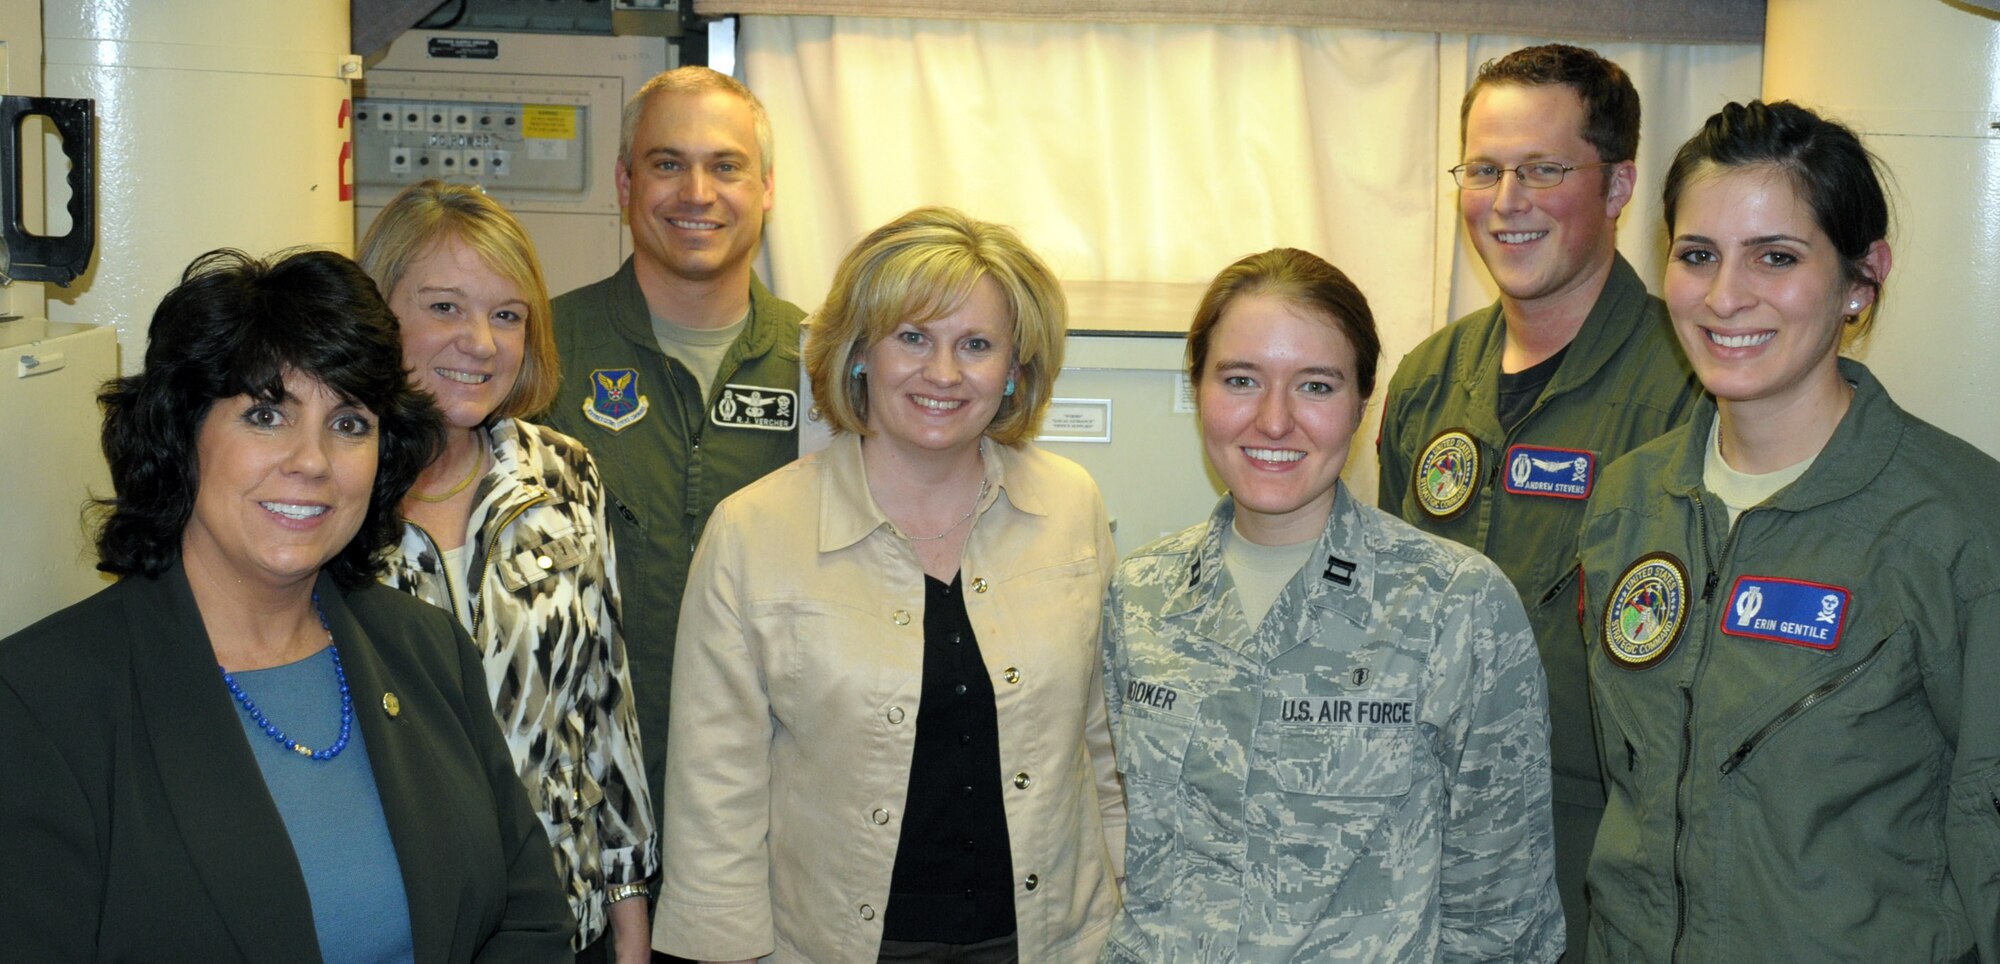 Ana Alston, Julie Kowalski and Julie Tims stand alongside Col. Robert Vercher, 90th Operations Group commander inside a launch control center near Burns, Neb. earlier this week. Also photographed are Capt. Sarah Hooker, 90th Medical Support Squadron, 1st Lt. Andrew Stevens and 2nd Lt. Erin Gentile from the 319th Missile Squadron. (U.S. Air Force by Blaze Lipowski)